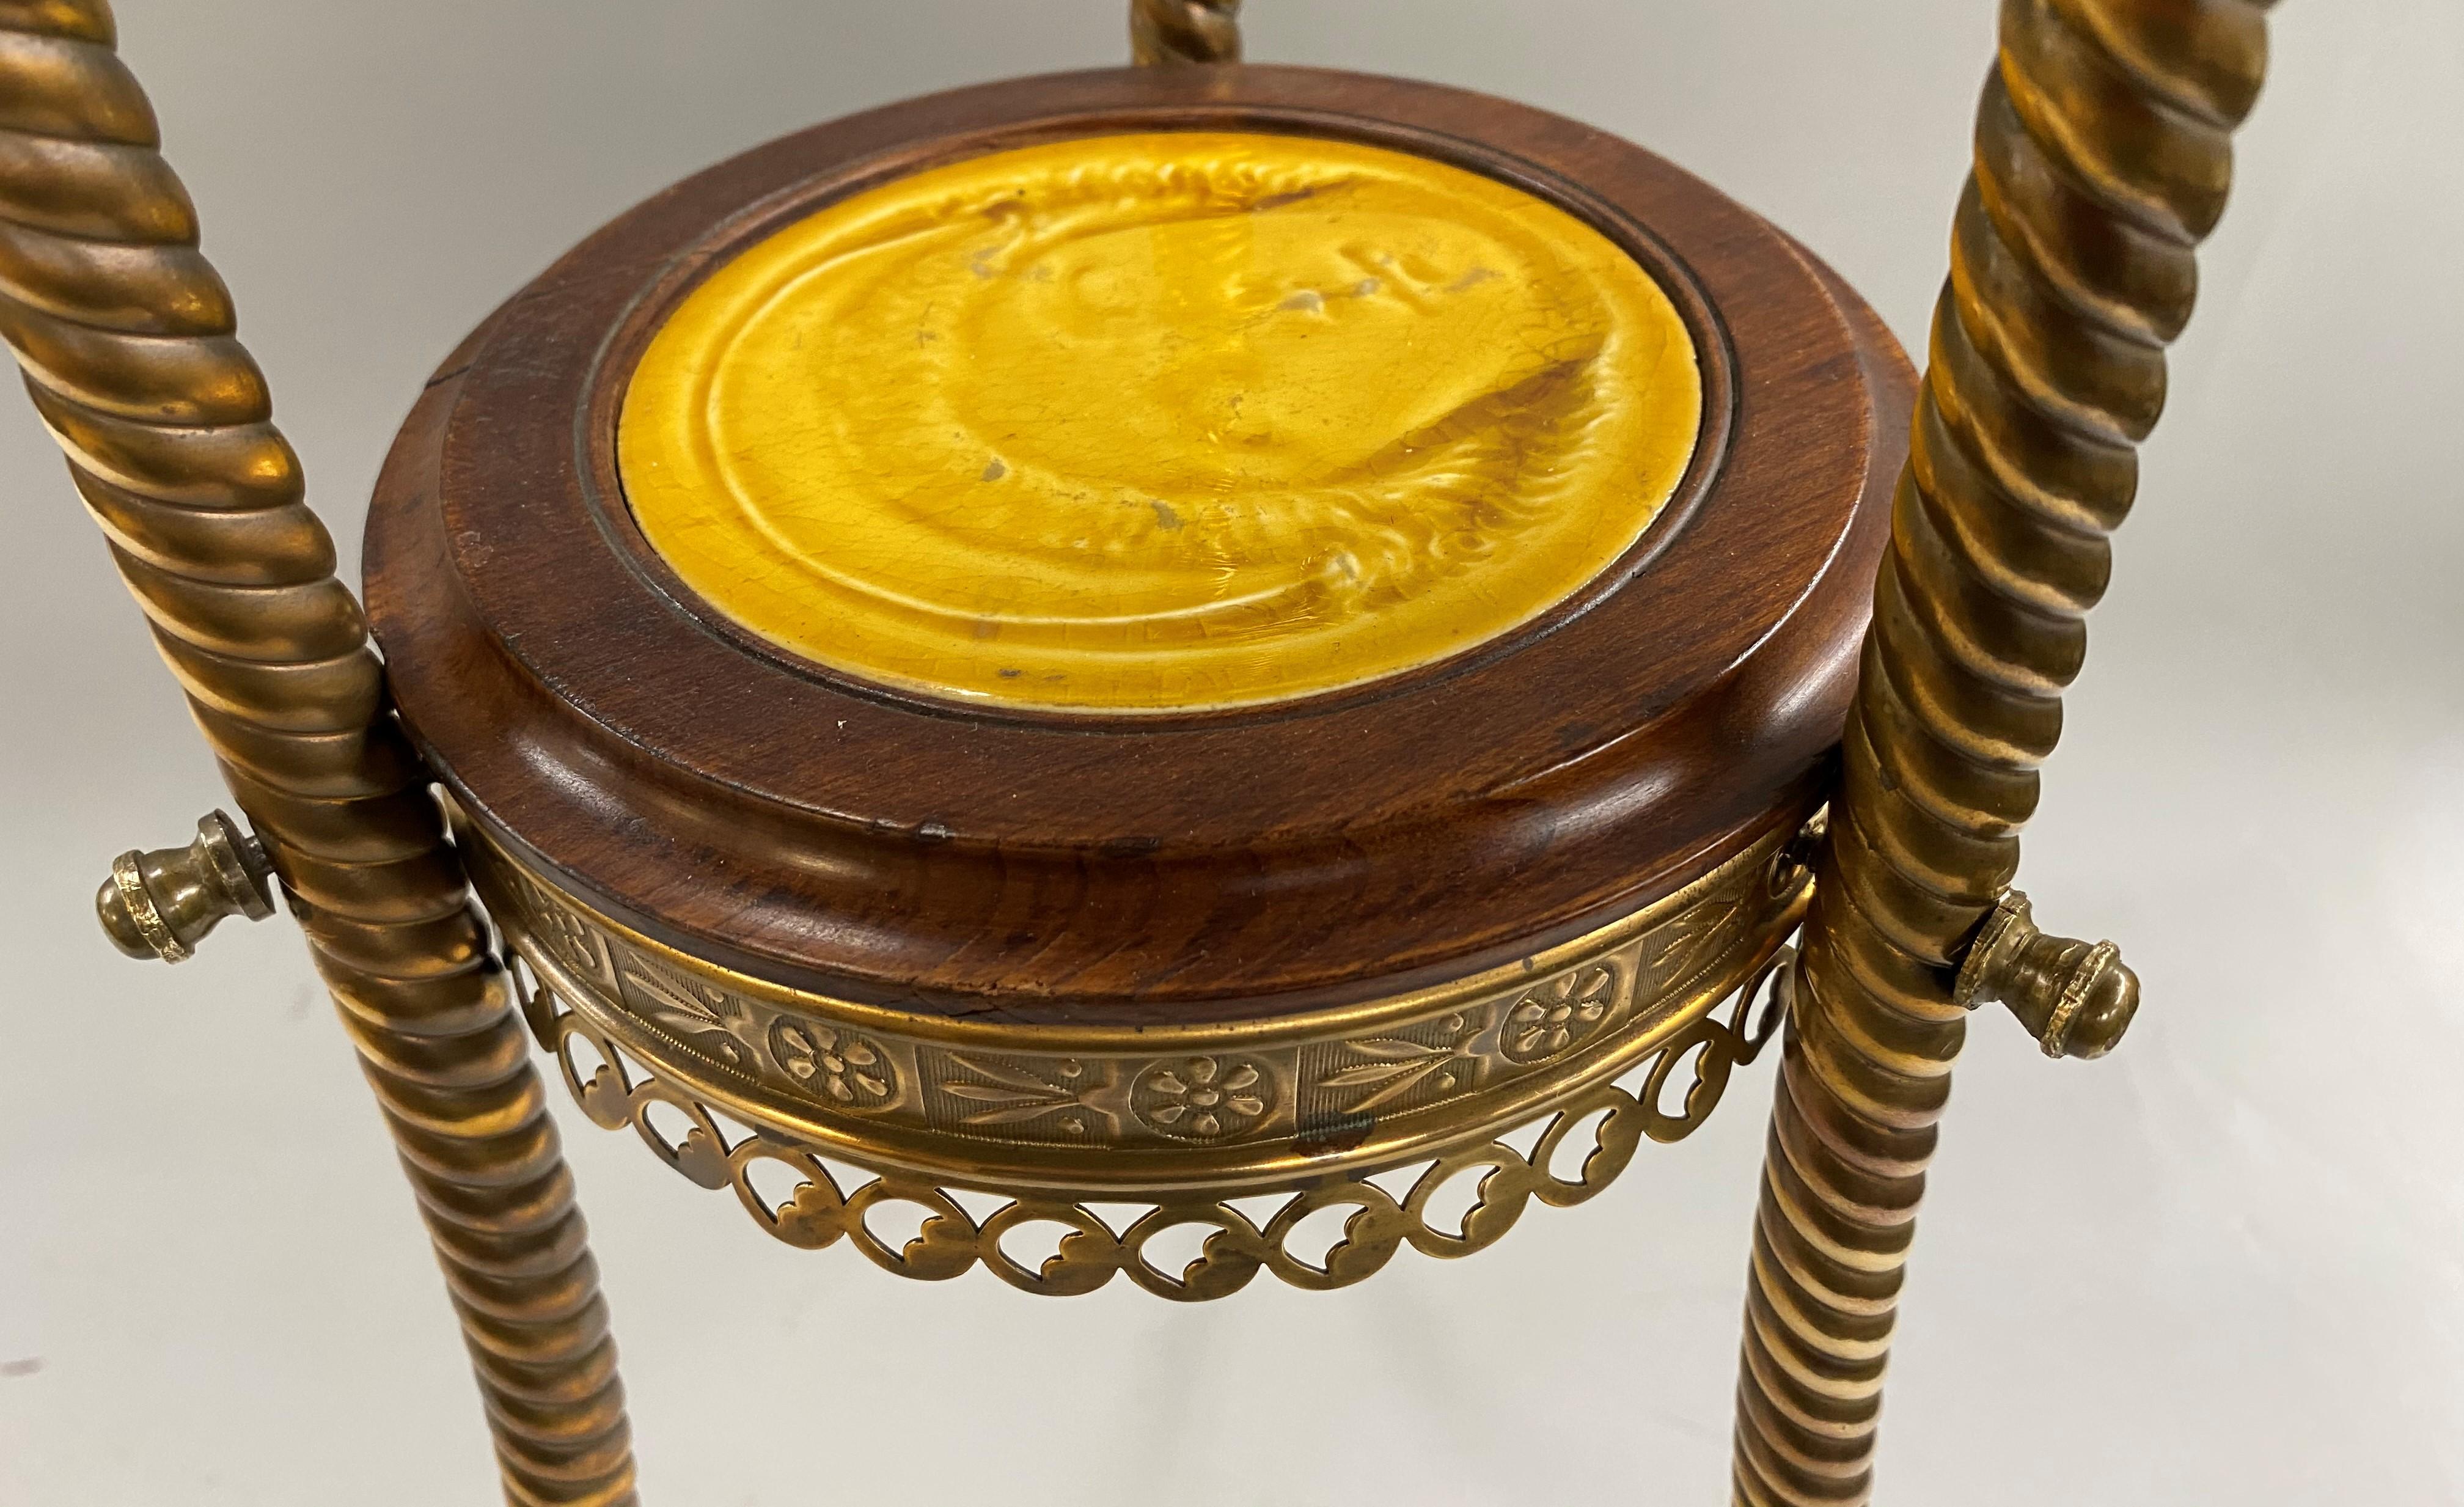 Hand-Carved J. & J.G. Low Chelsea Tile Wooden and Brass Pedestal or Tripod Stand, circa 1884